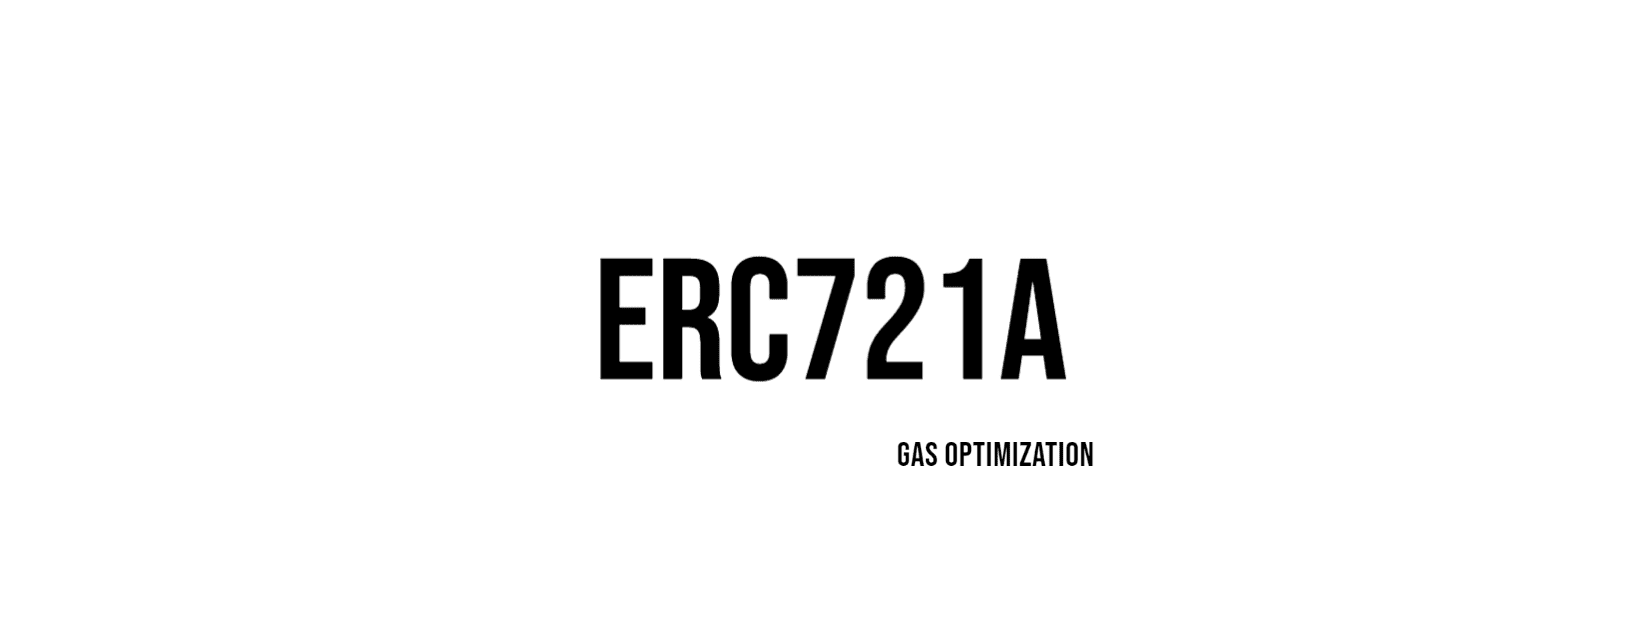 Gas optimization in the ERC721a implementation